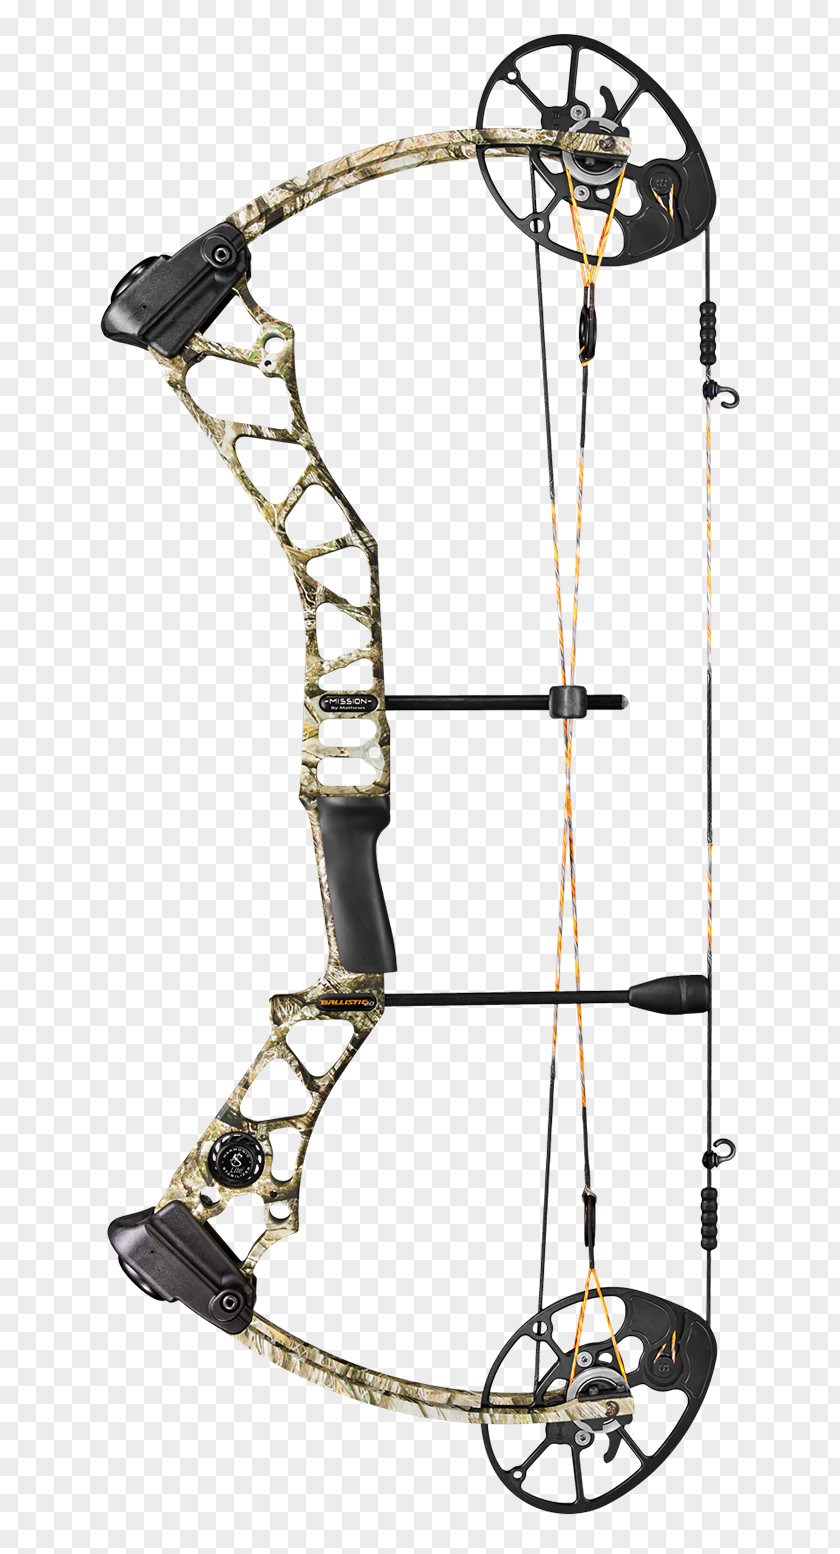 Arrow Bow Compound Bows Archery And Price Hunting PNG